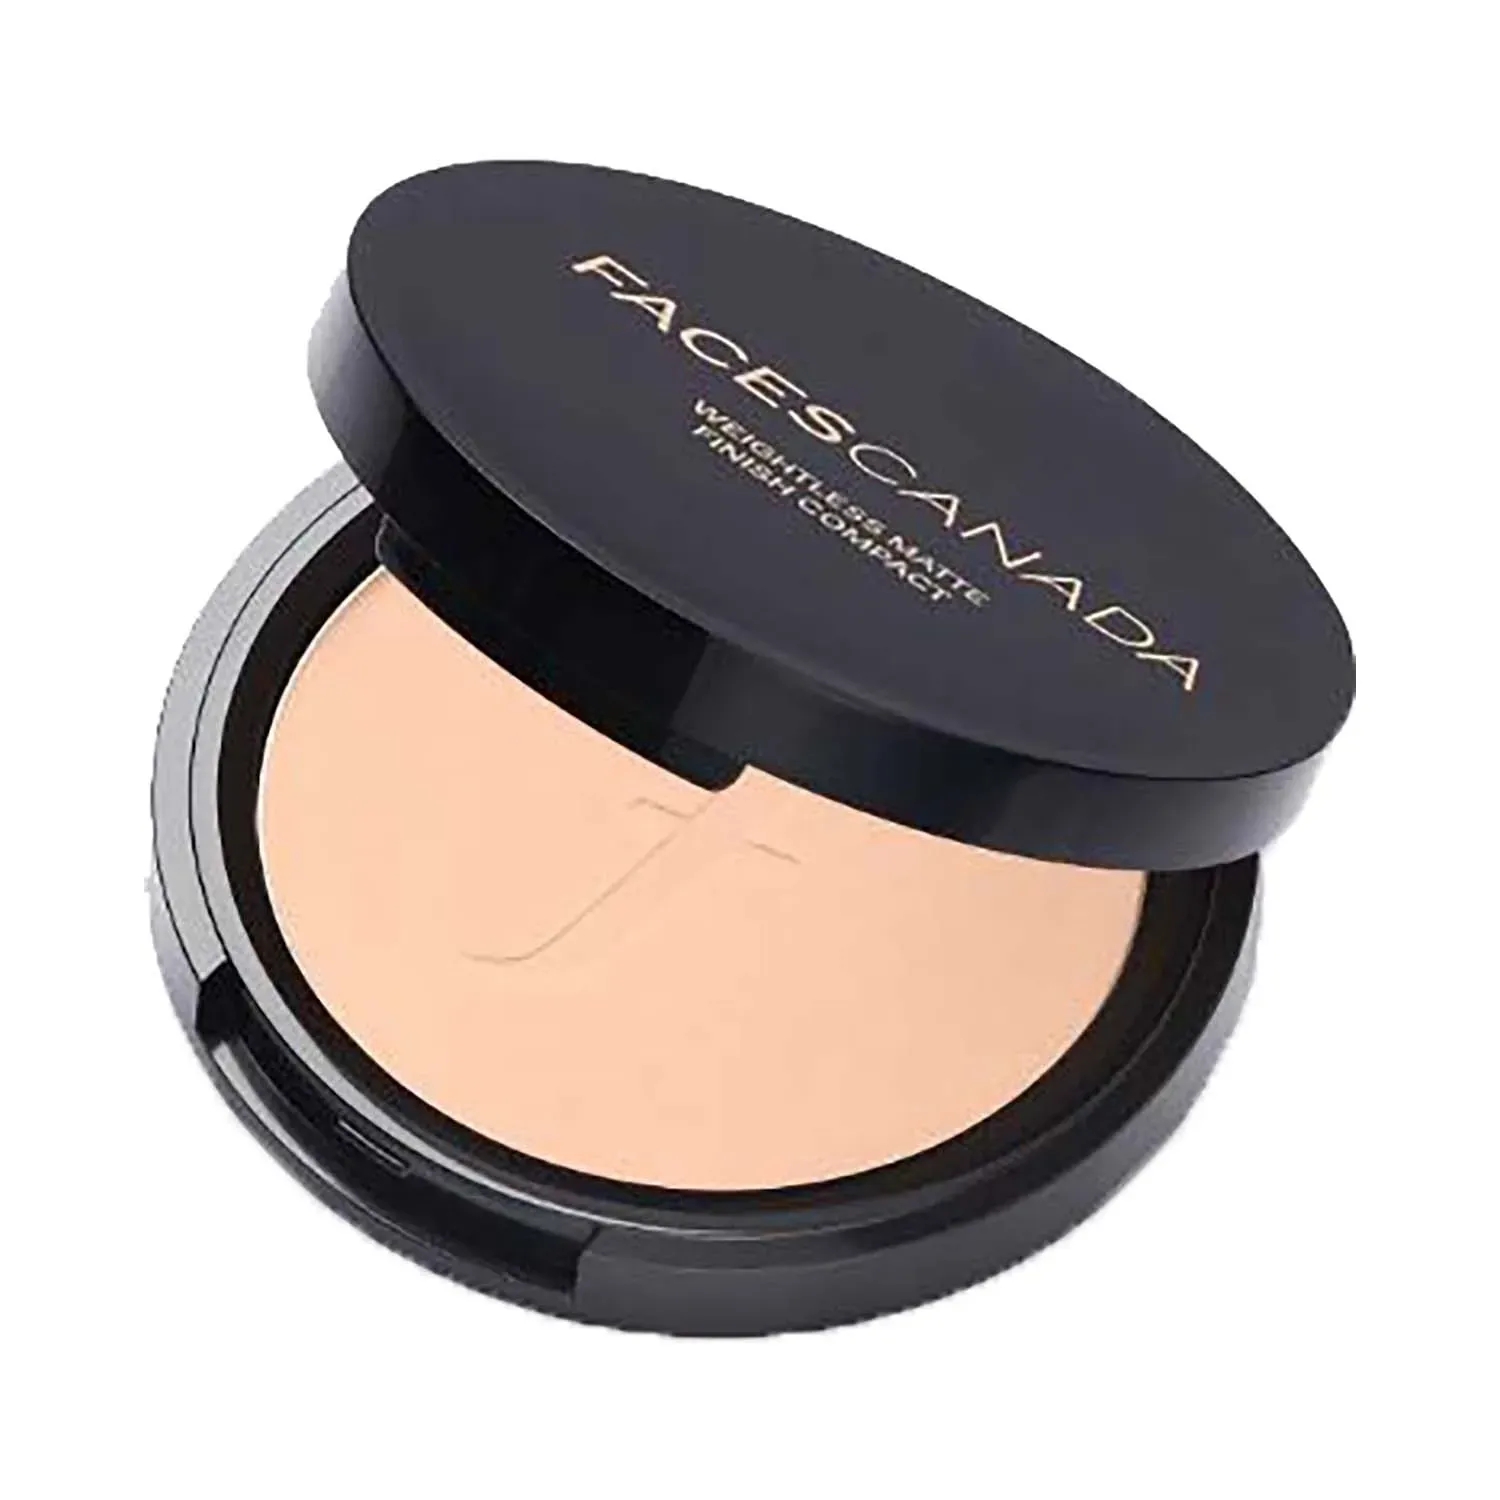 Faces Canada | Faces Canada Weightless Matte Finish Compact - 01 Ivory (9g)